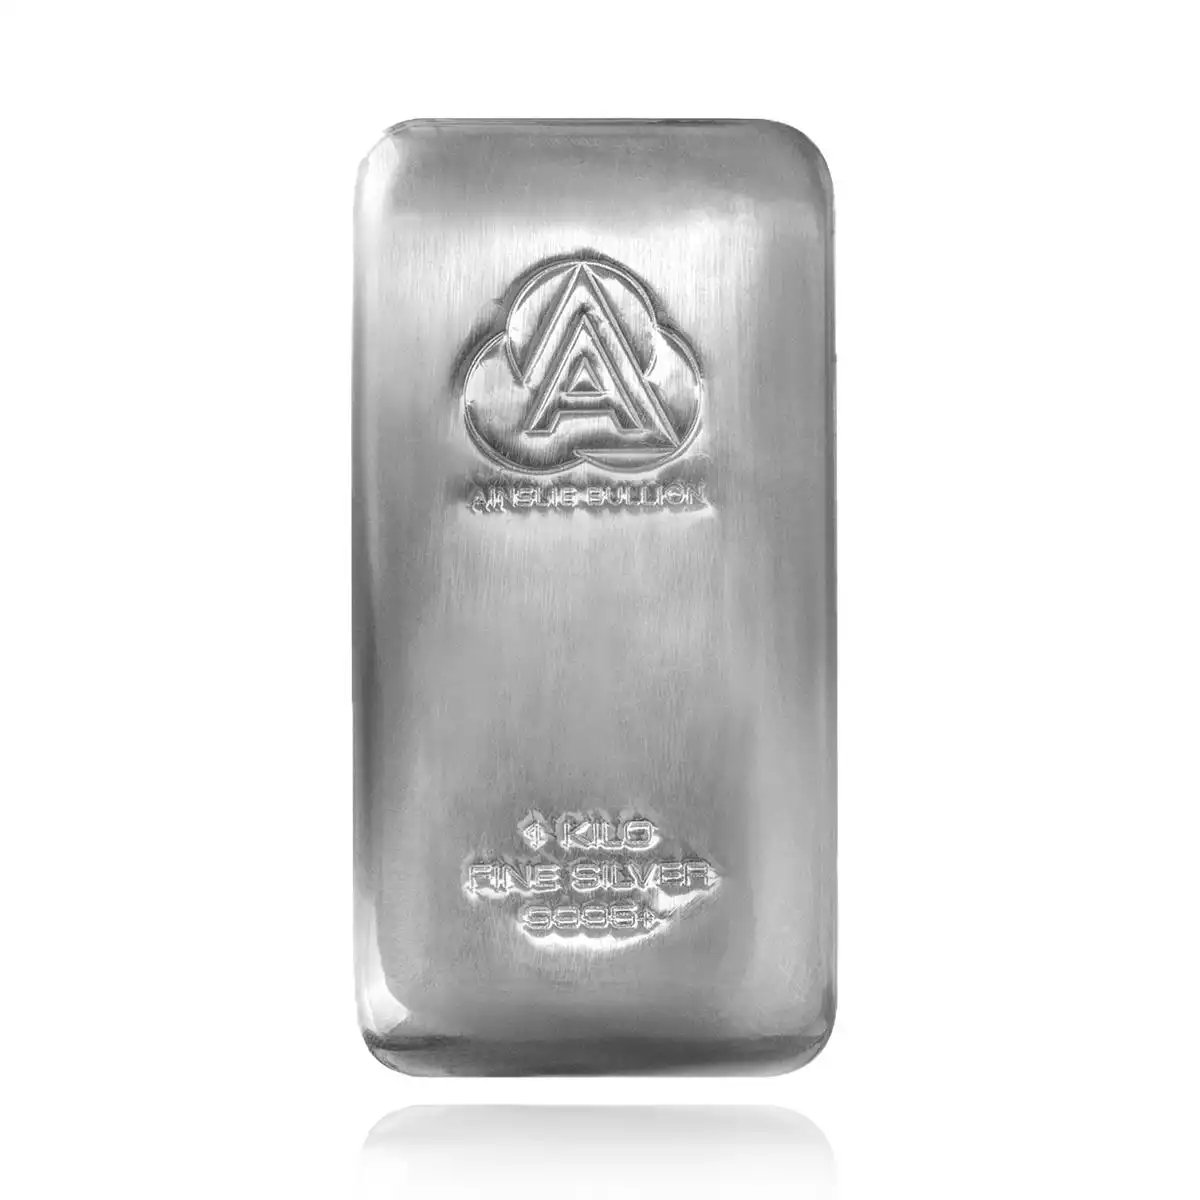 1kg ainslie silver bullion. our most popular silver bar, the 1 kg ainslie silver bar is an excellent way for investors to continue building their silv...